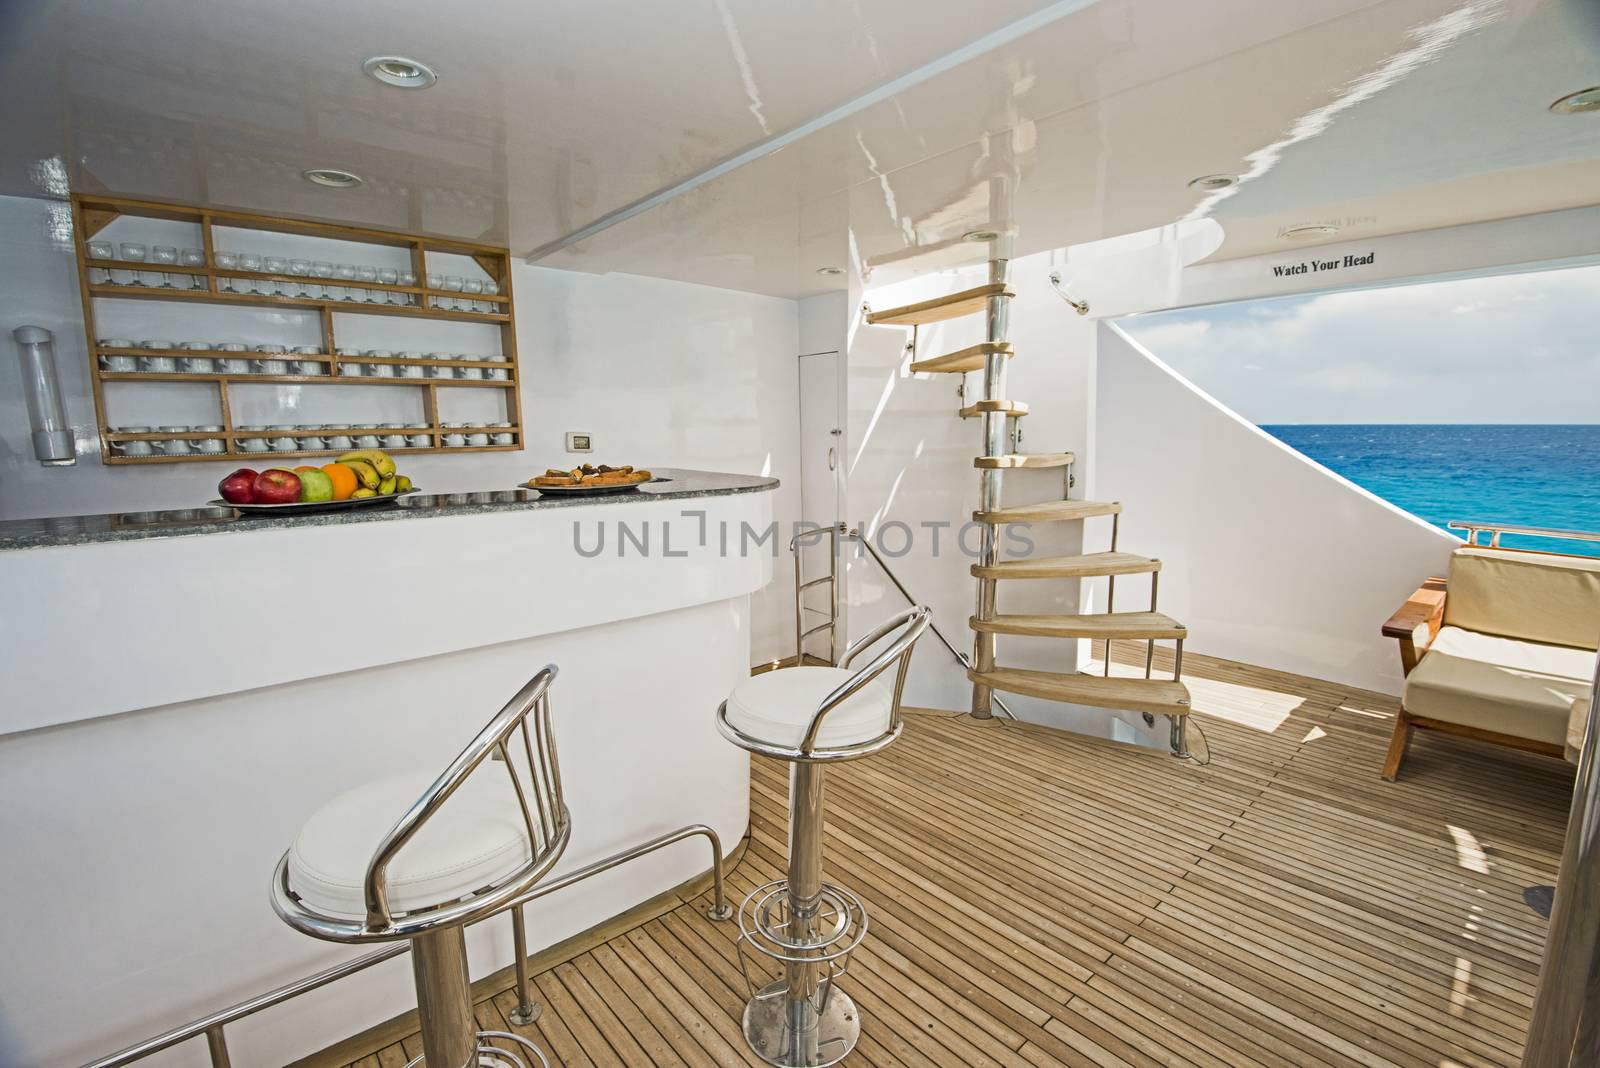 Bar area with stools on deck of a luxury motor yacht by paulvinten